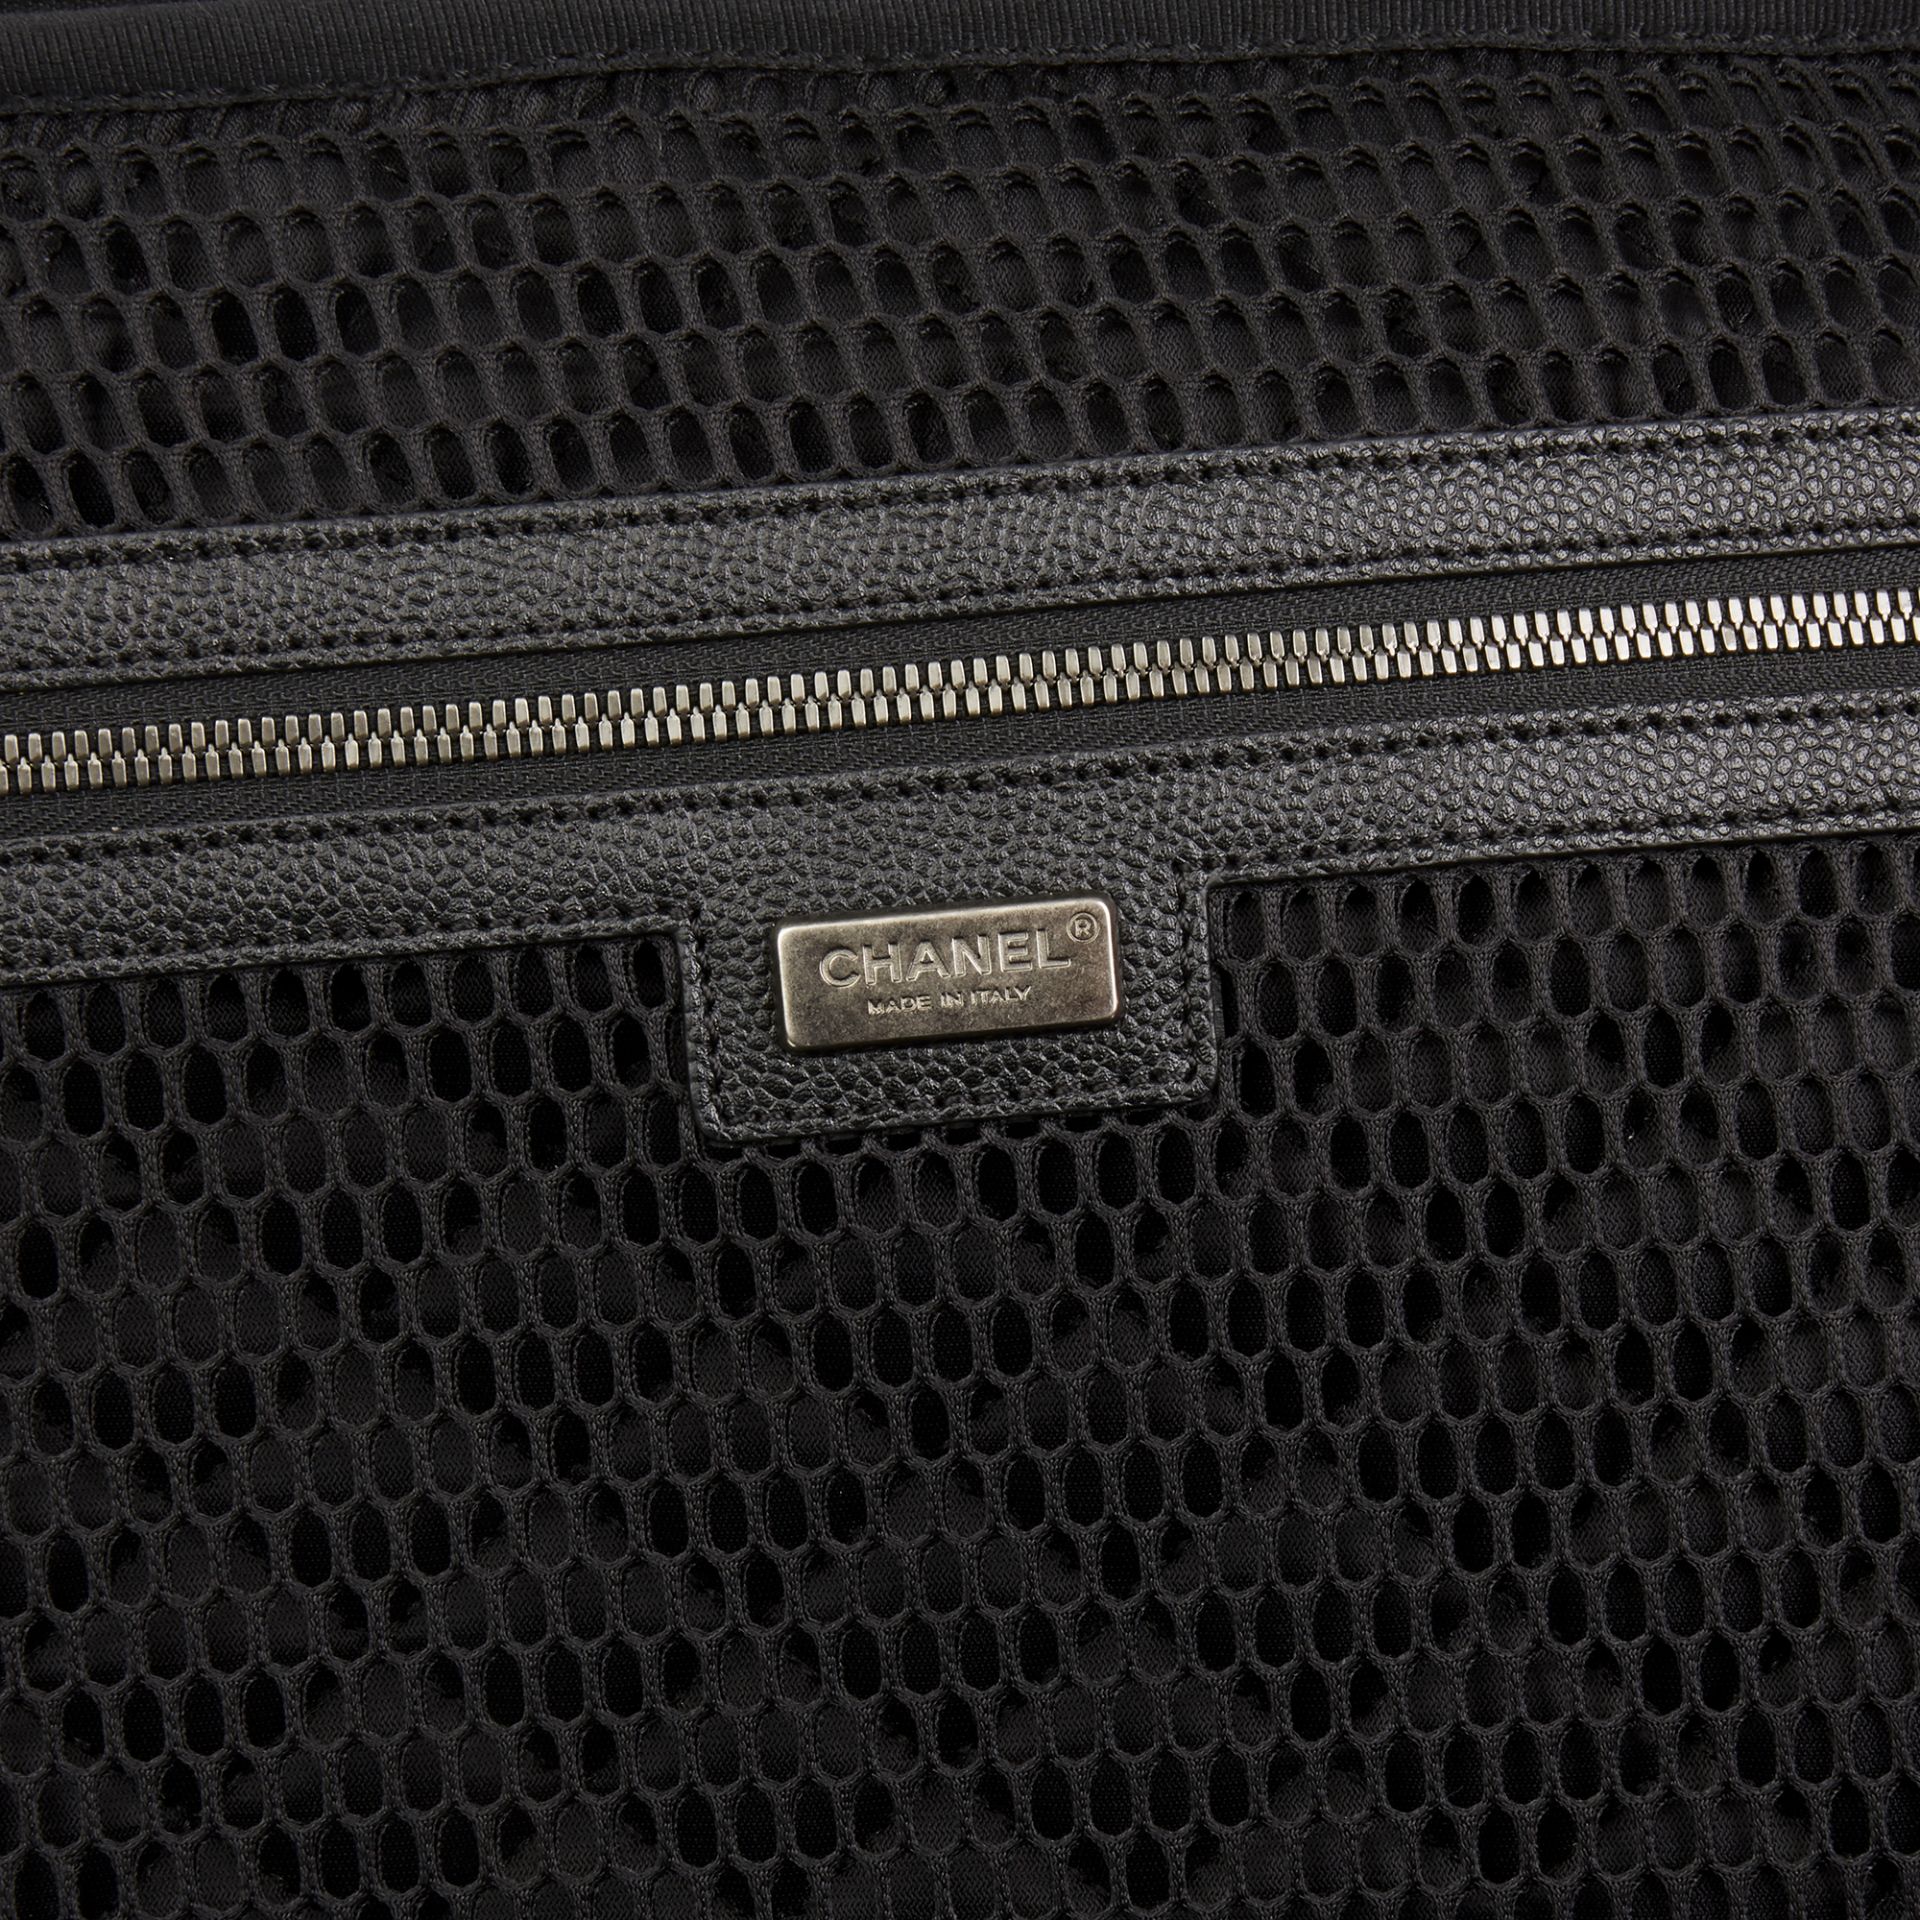 Chanel Jacket Trolley Rolling Suitcase - Image 8 of 13